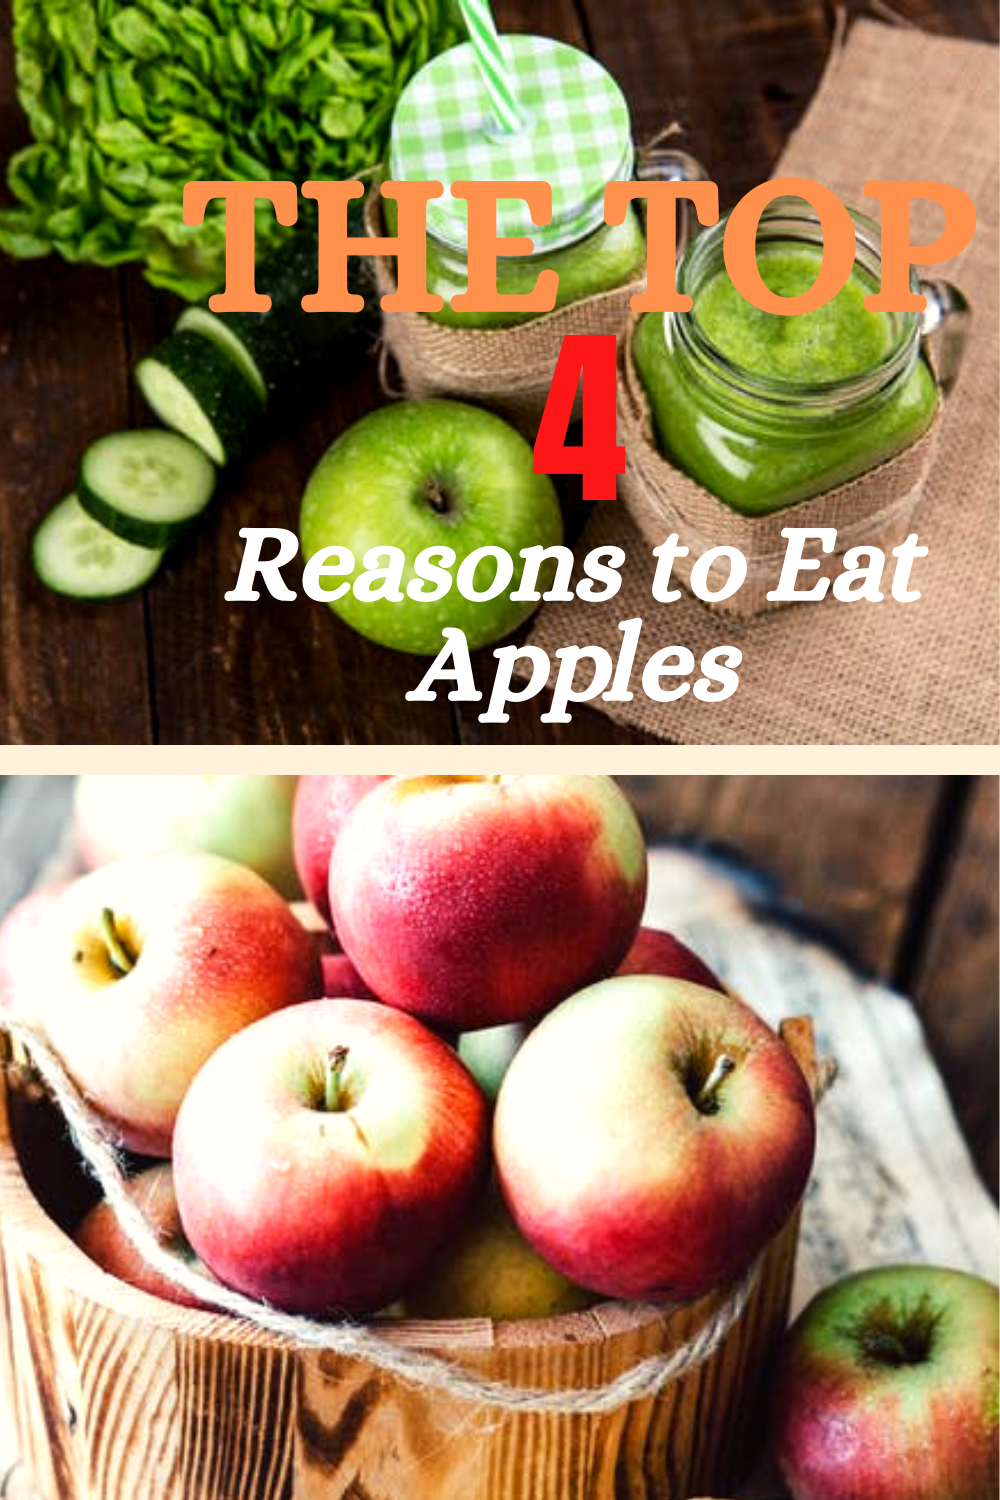 The Top 4 Reasons to Eat Apples